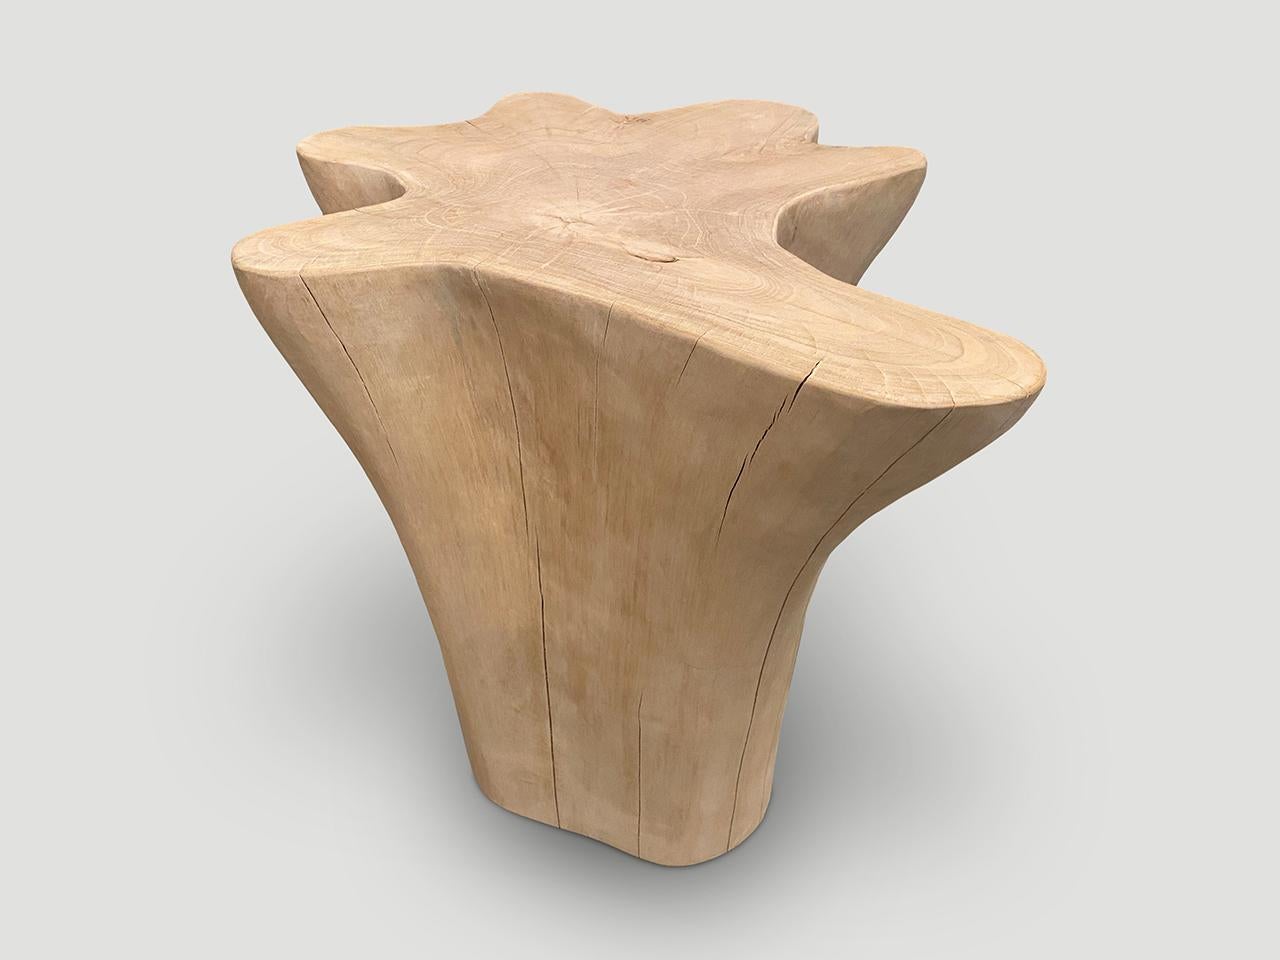 Amorphous reclaimed bleached teak side table or pedestal. A graduation from the bottom to the top at 13